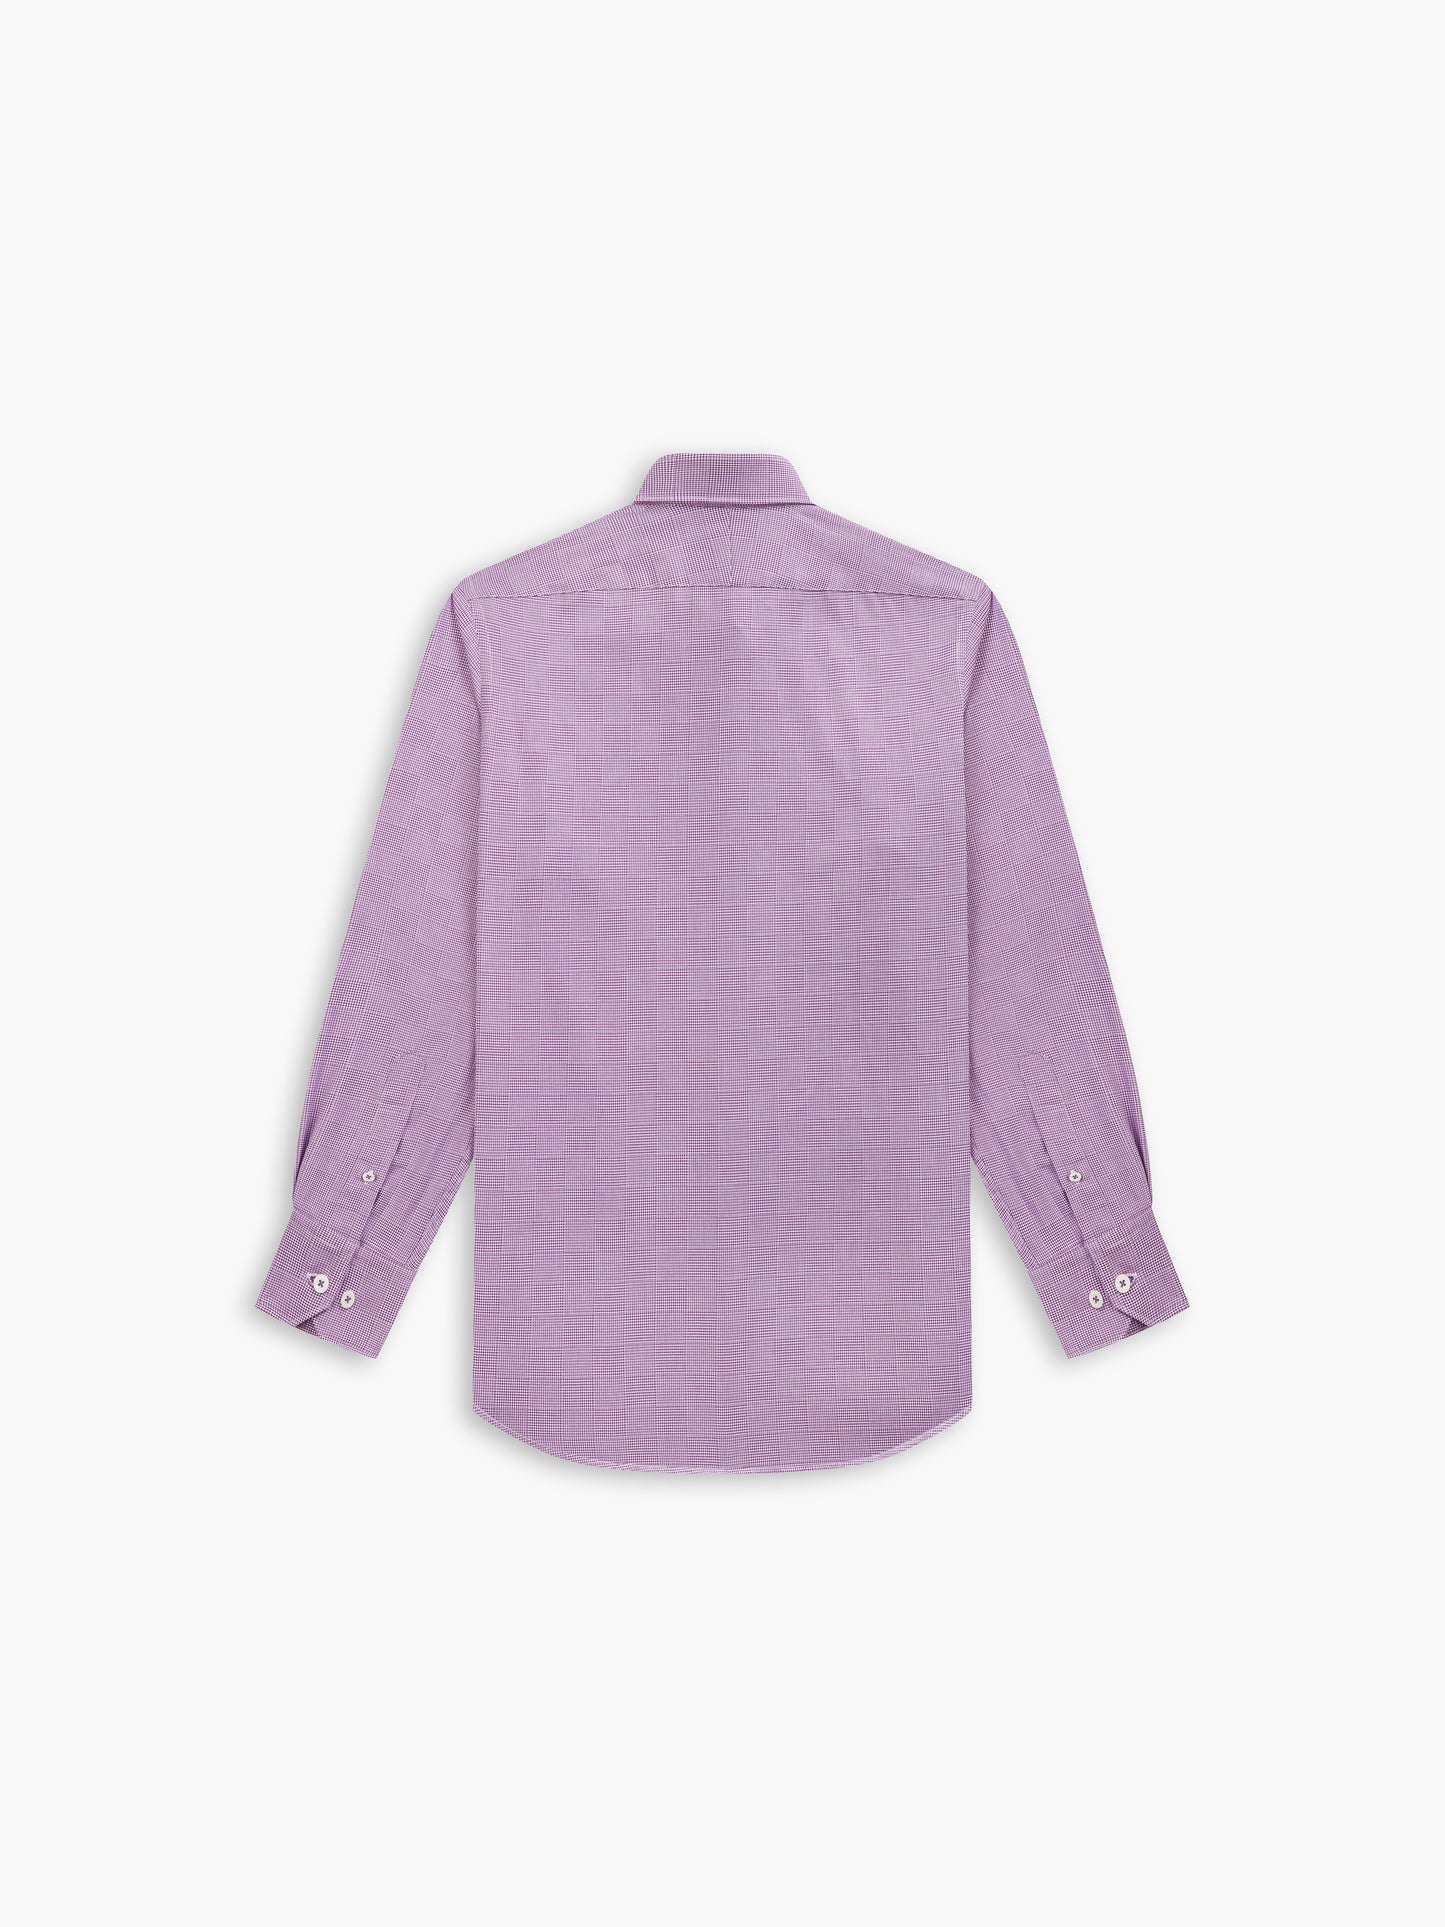 Plum Optical Dogtooth Plain Weave Fitted Single Cuff Classic Collar Shirt